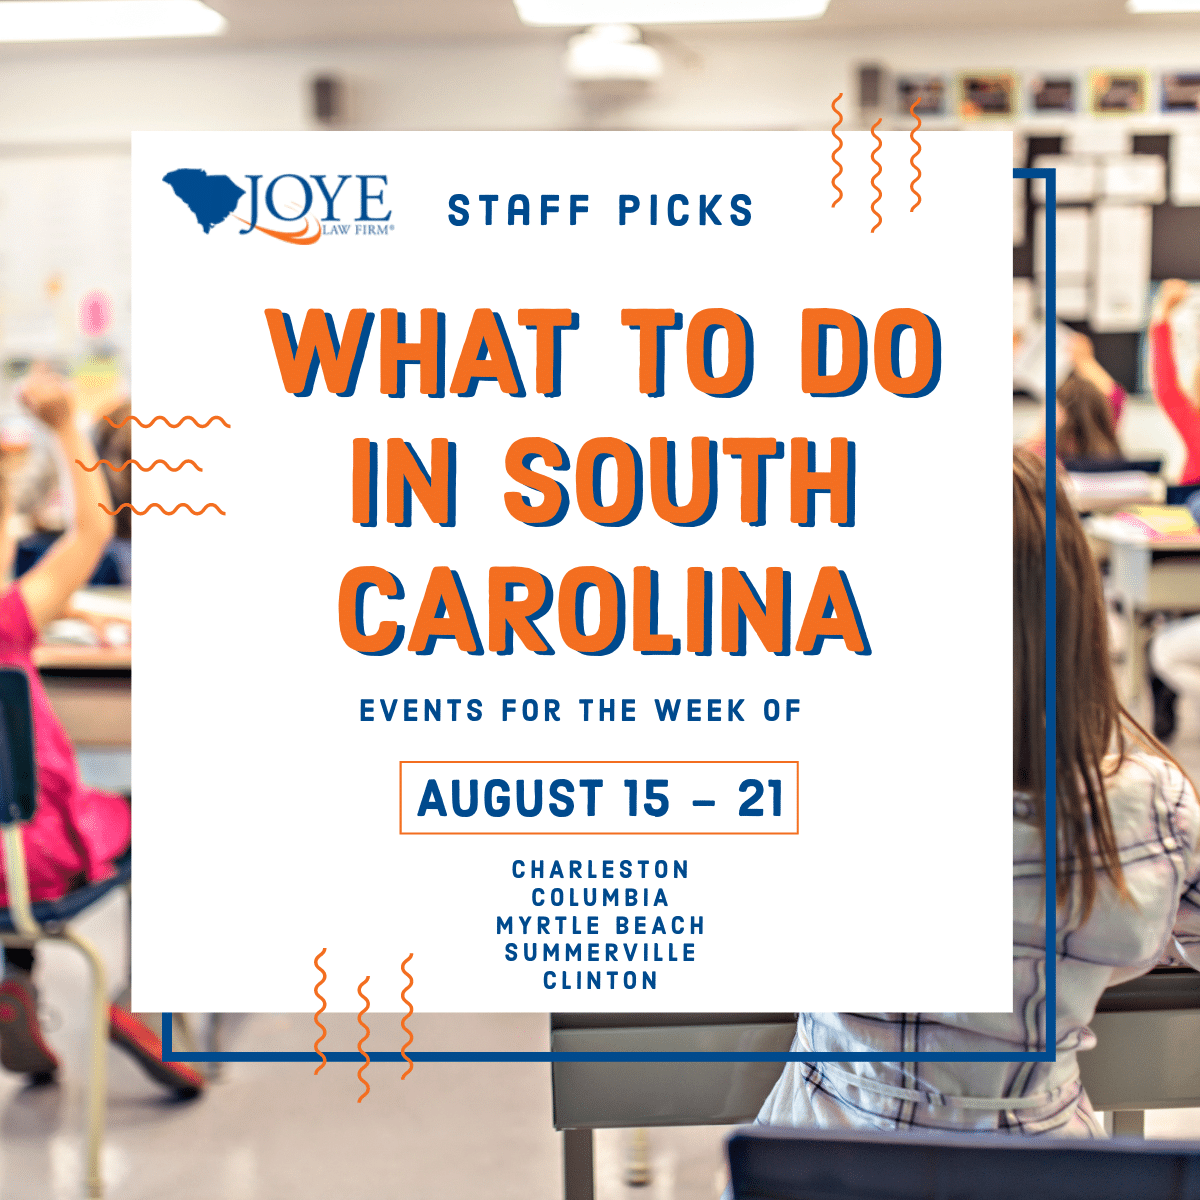 What to do in South Carolina events for the week of August 15-21 for Charleston, Columbia, Myrtle Beach, Summerville and upstate